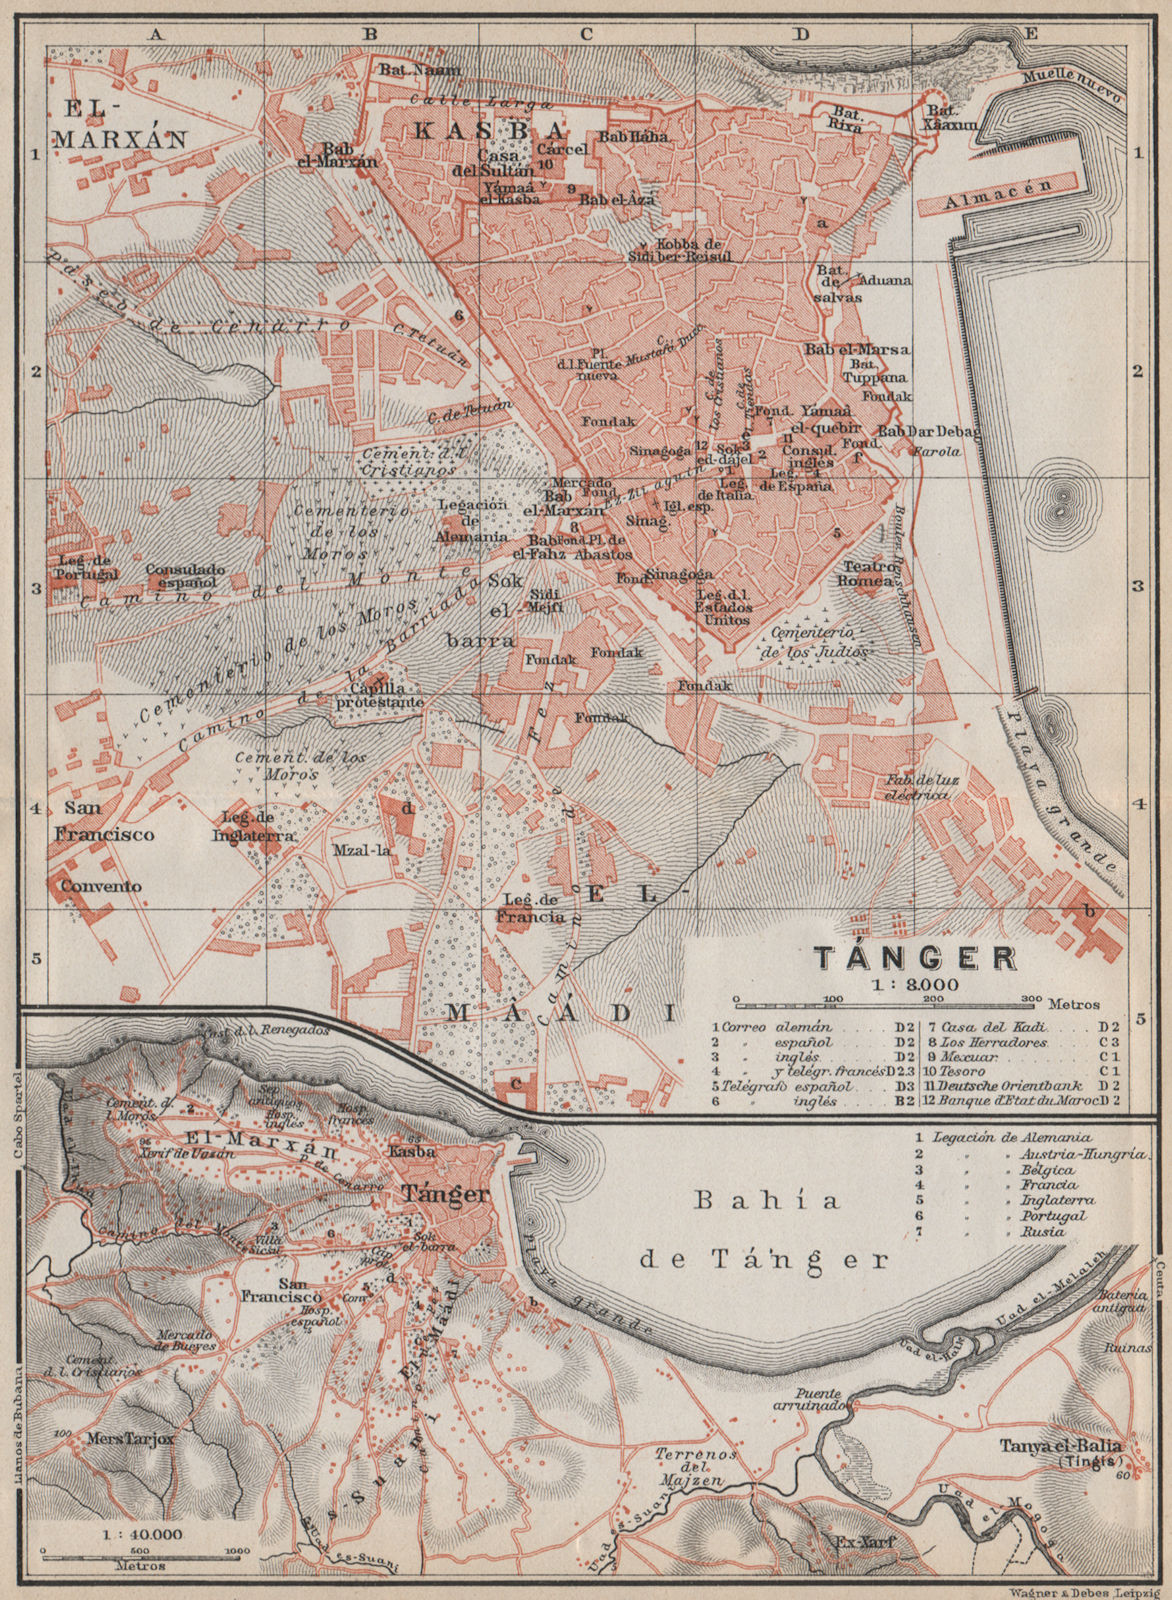 TANGIER TÁNGER antique town city plan & environs. Morocco carte 1911 old map